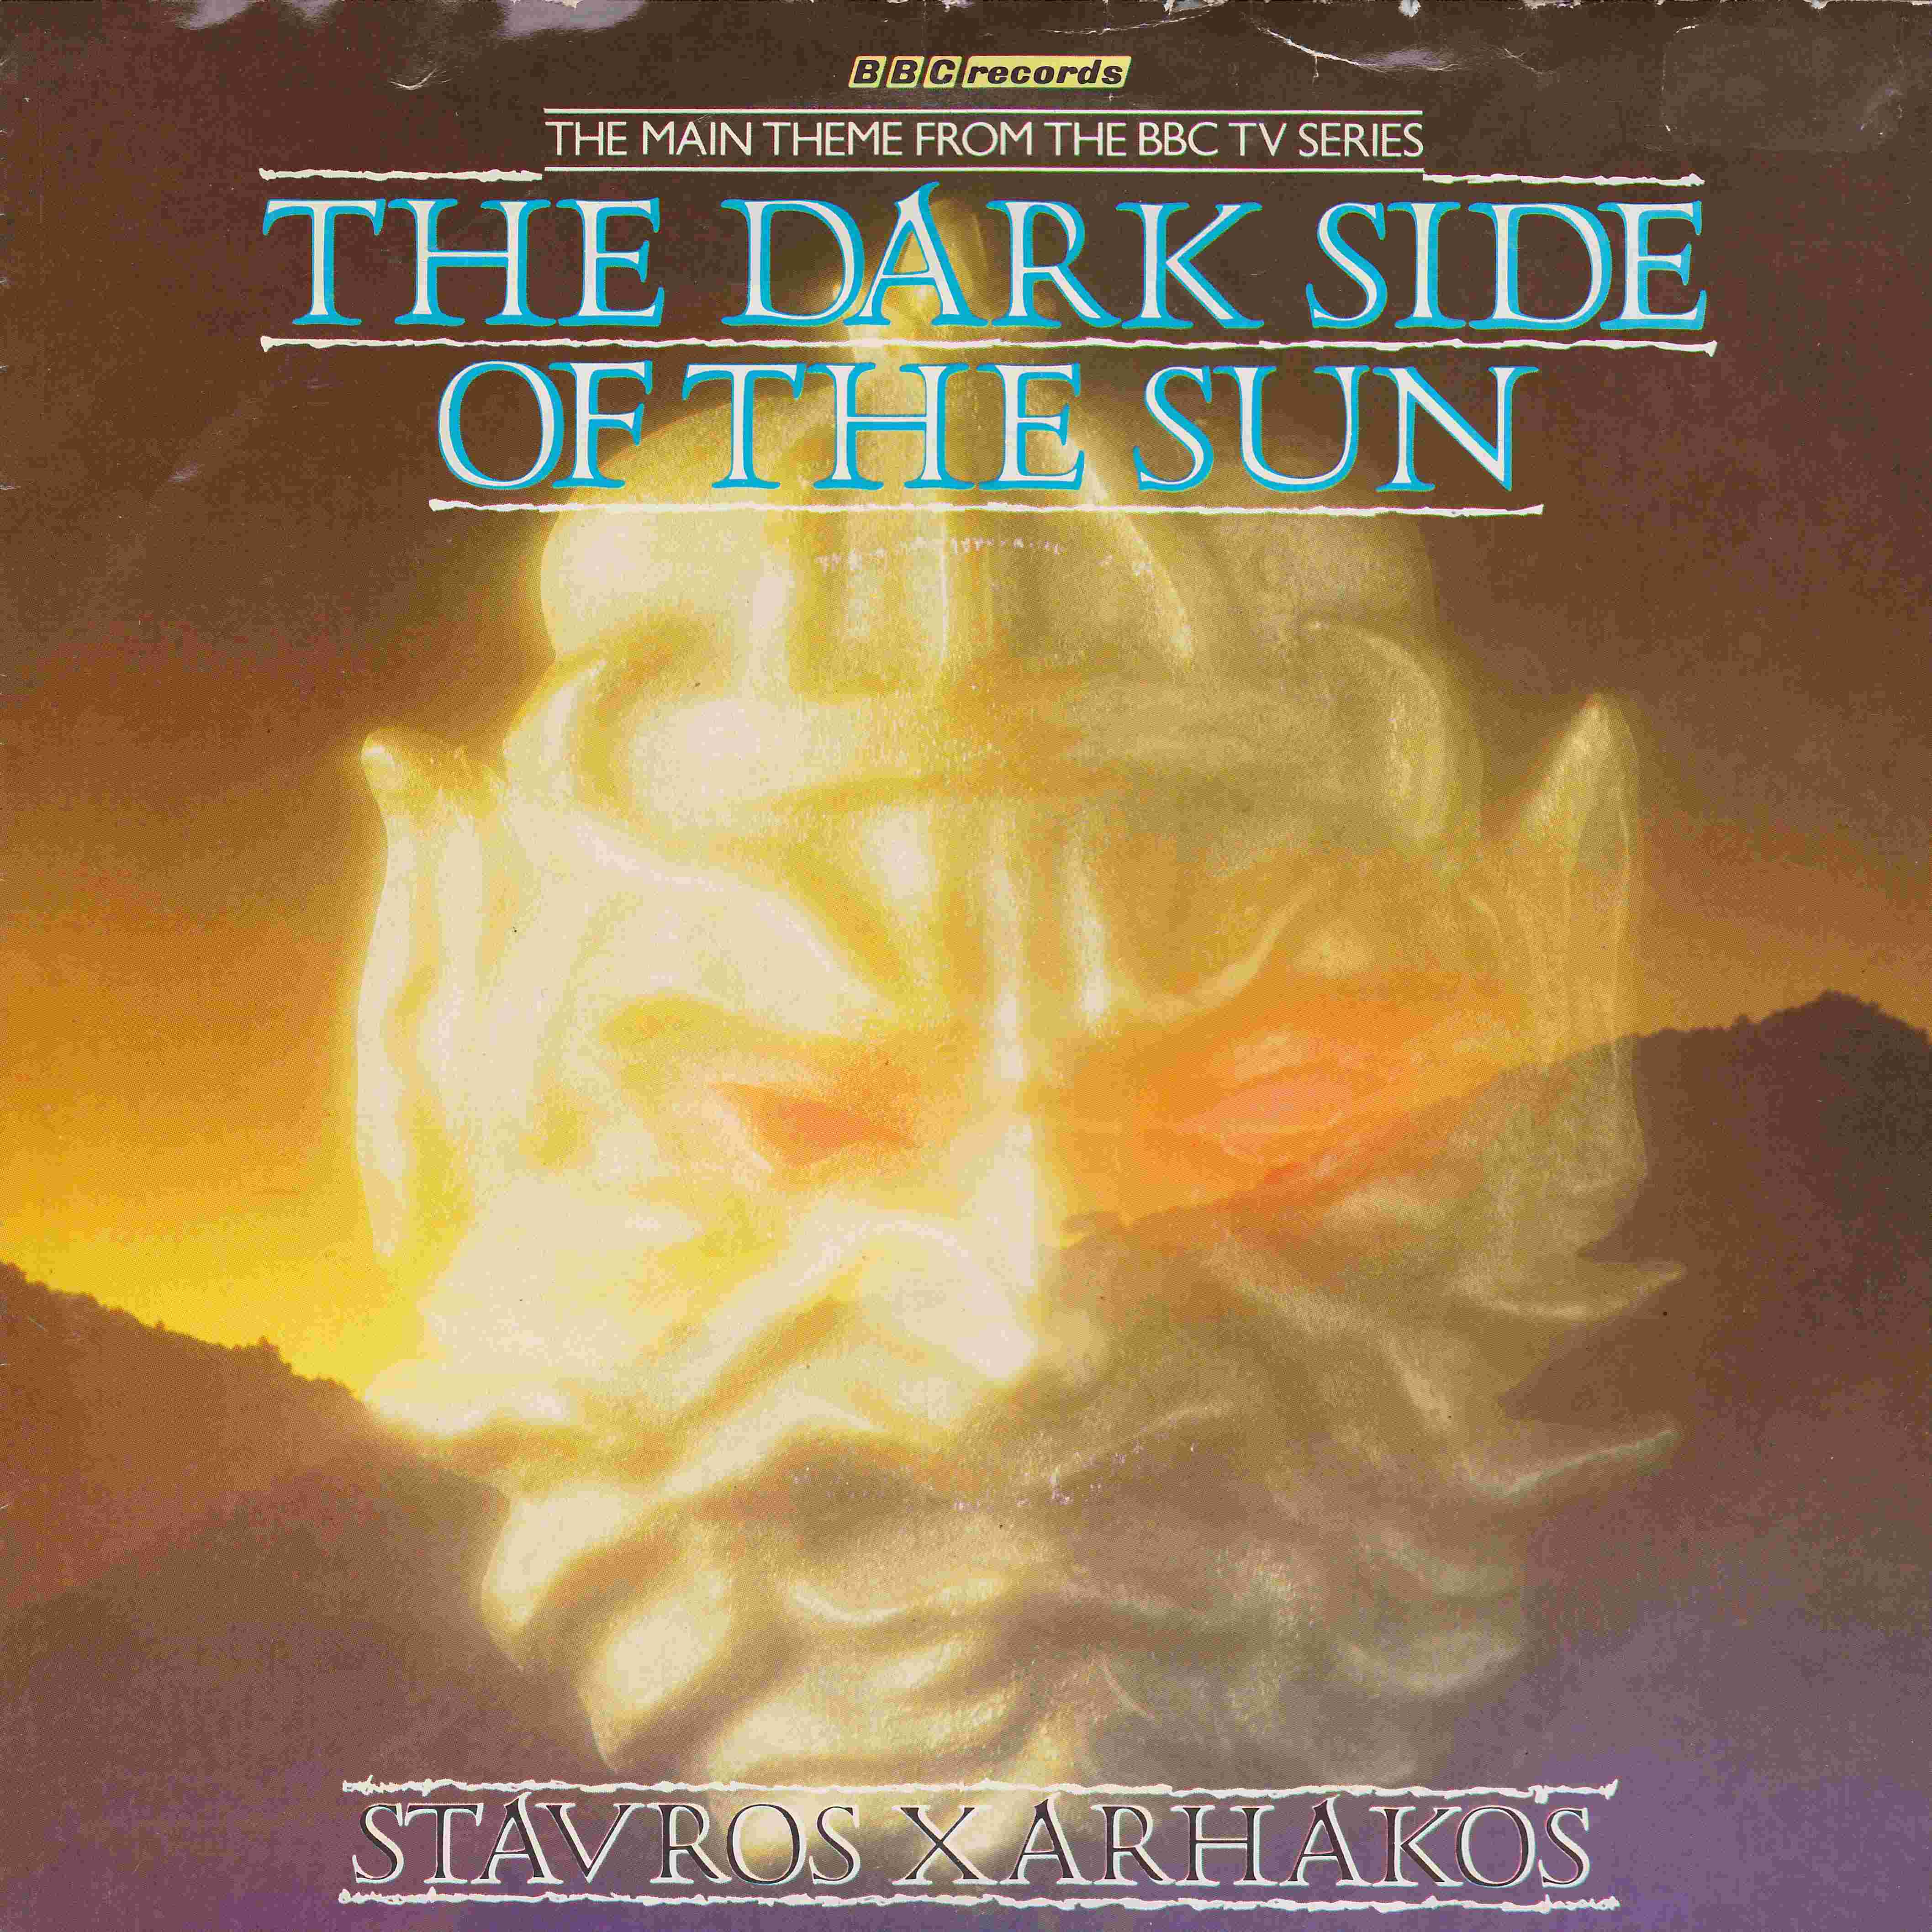 Picture of RESL 135 The dark side of the sun by artist Stavros Xarhakos from the BBC records and Tapes library